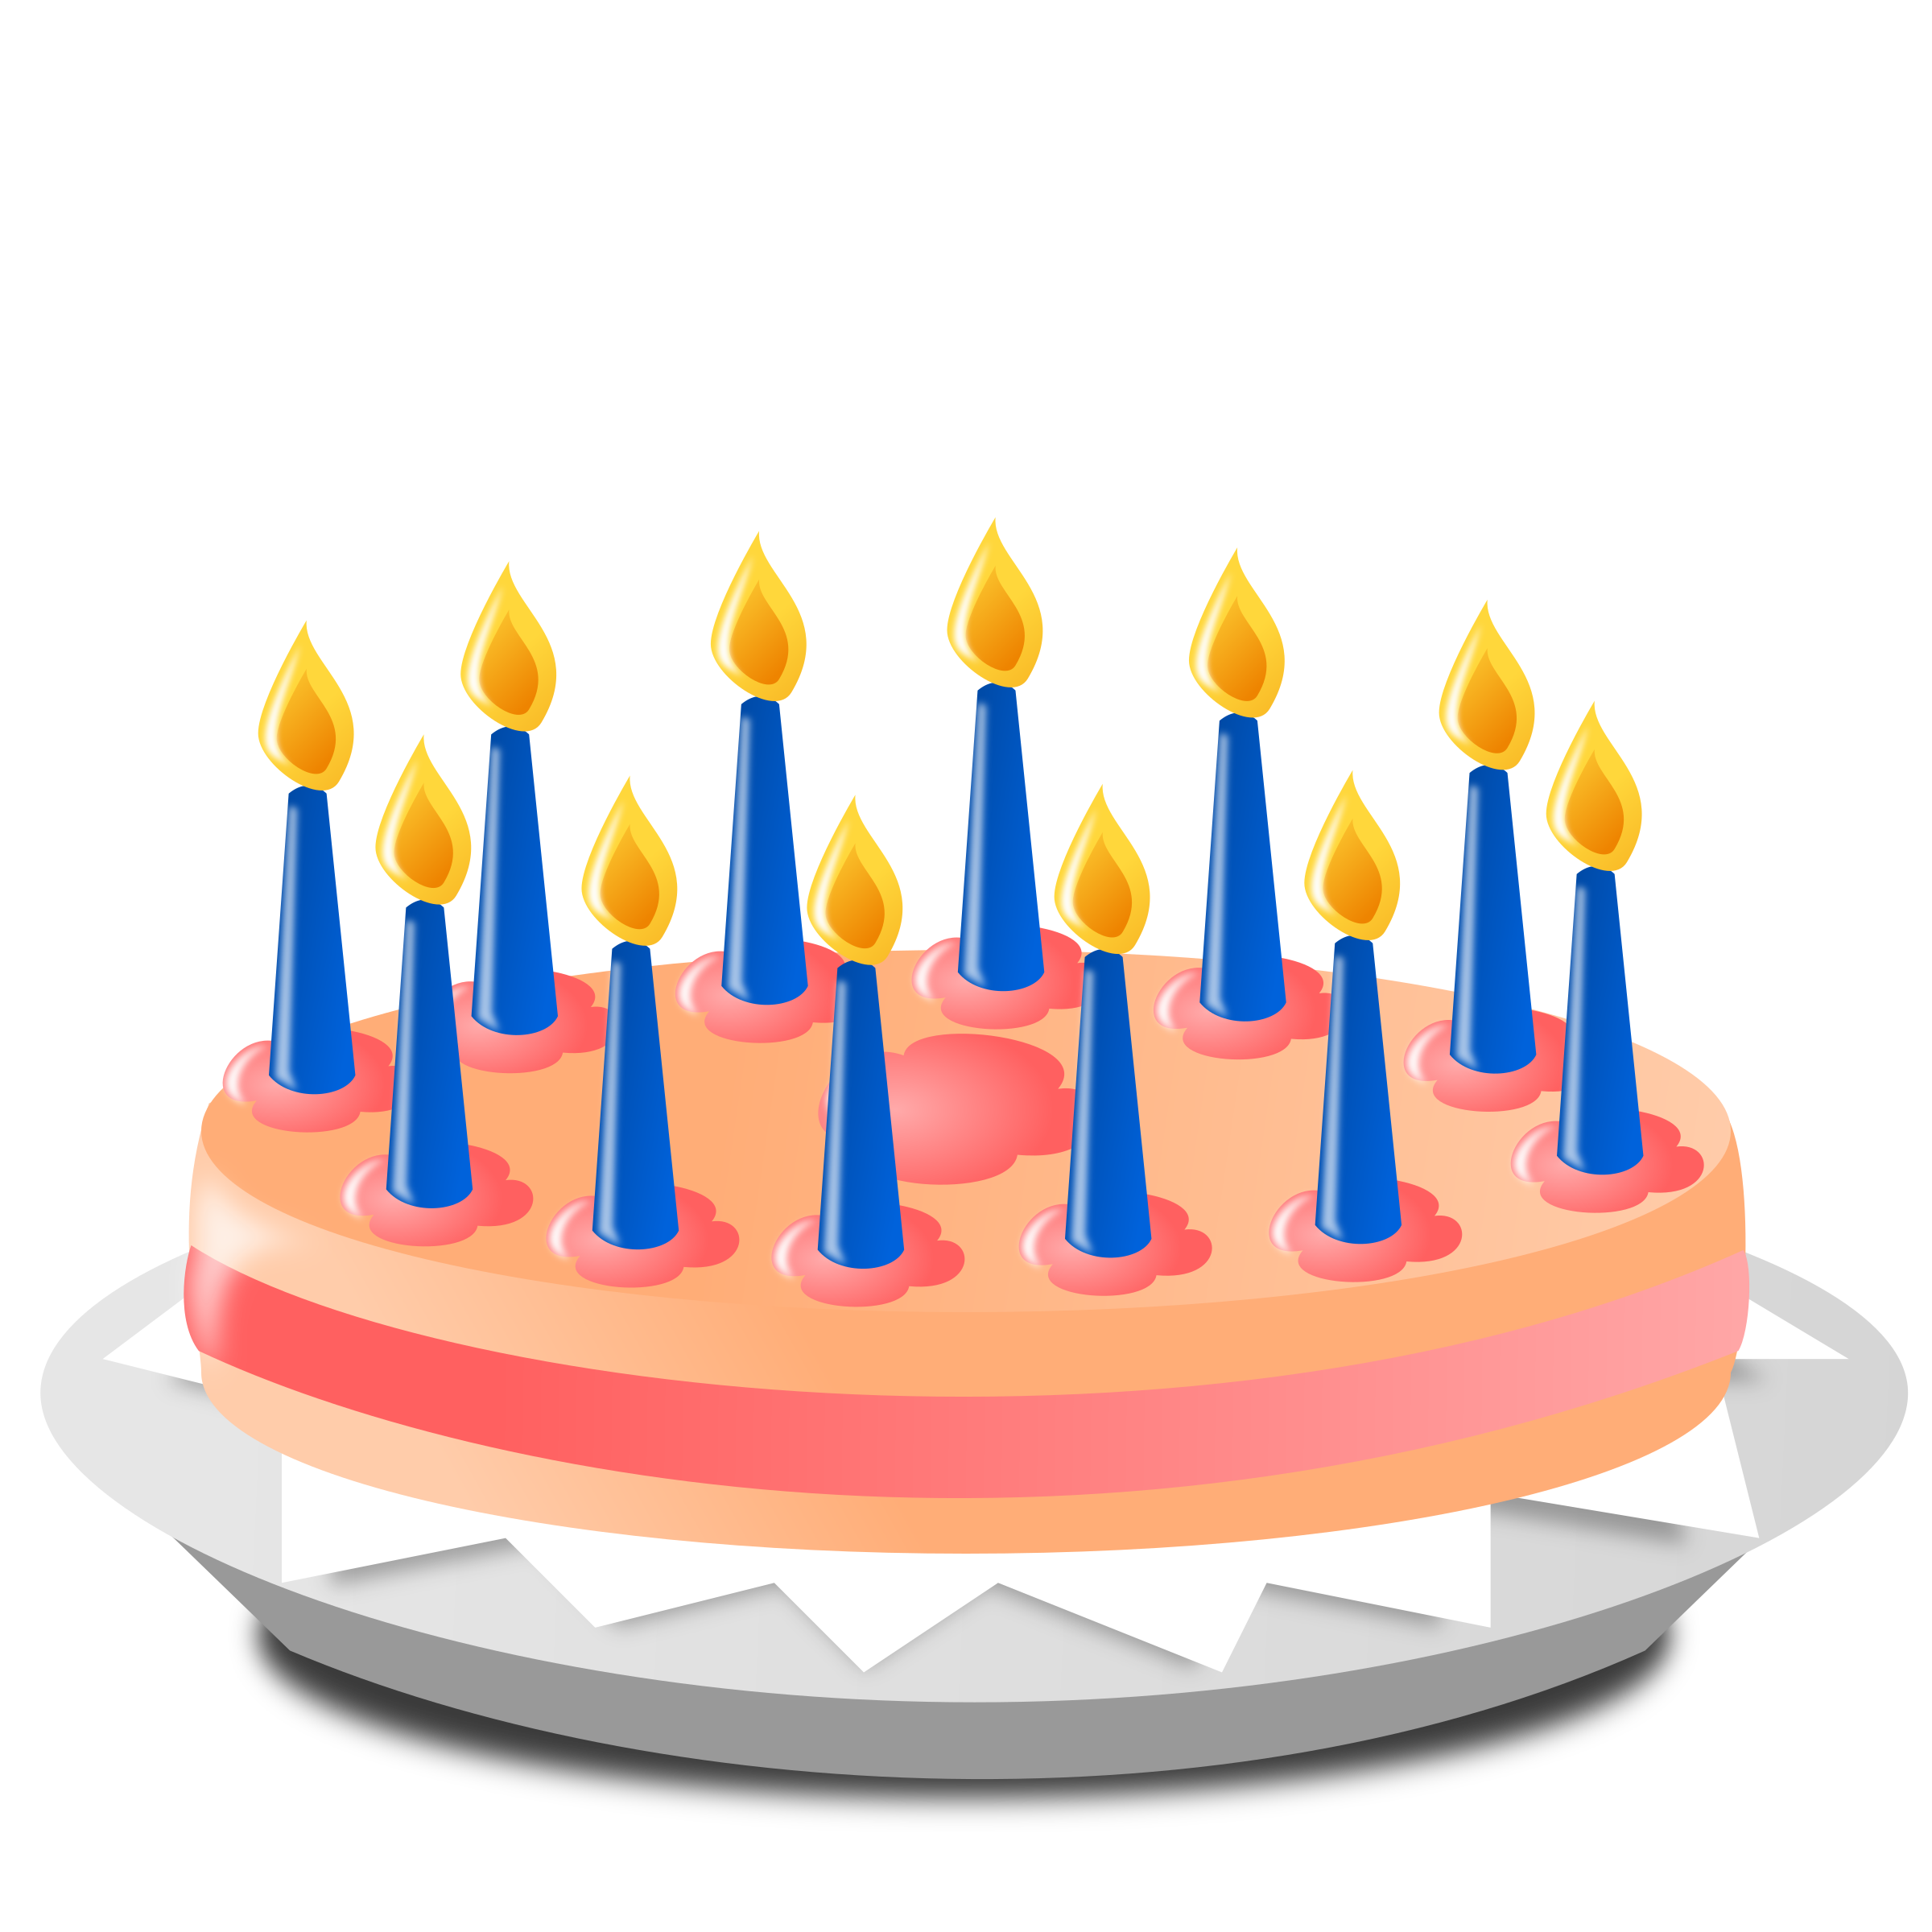 https://openclipart.org/image/2400px/svg_to_png/93901/anniversary01.png